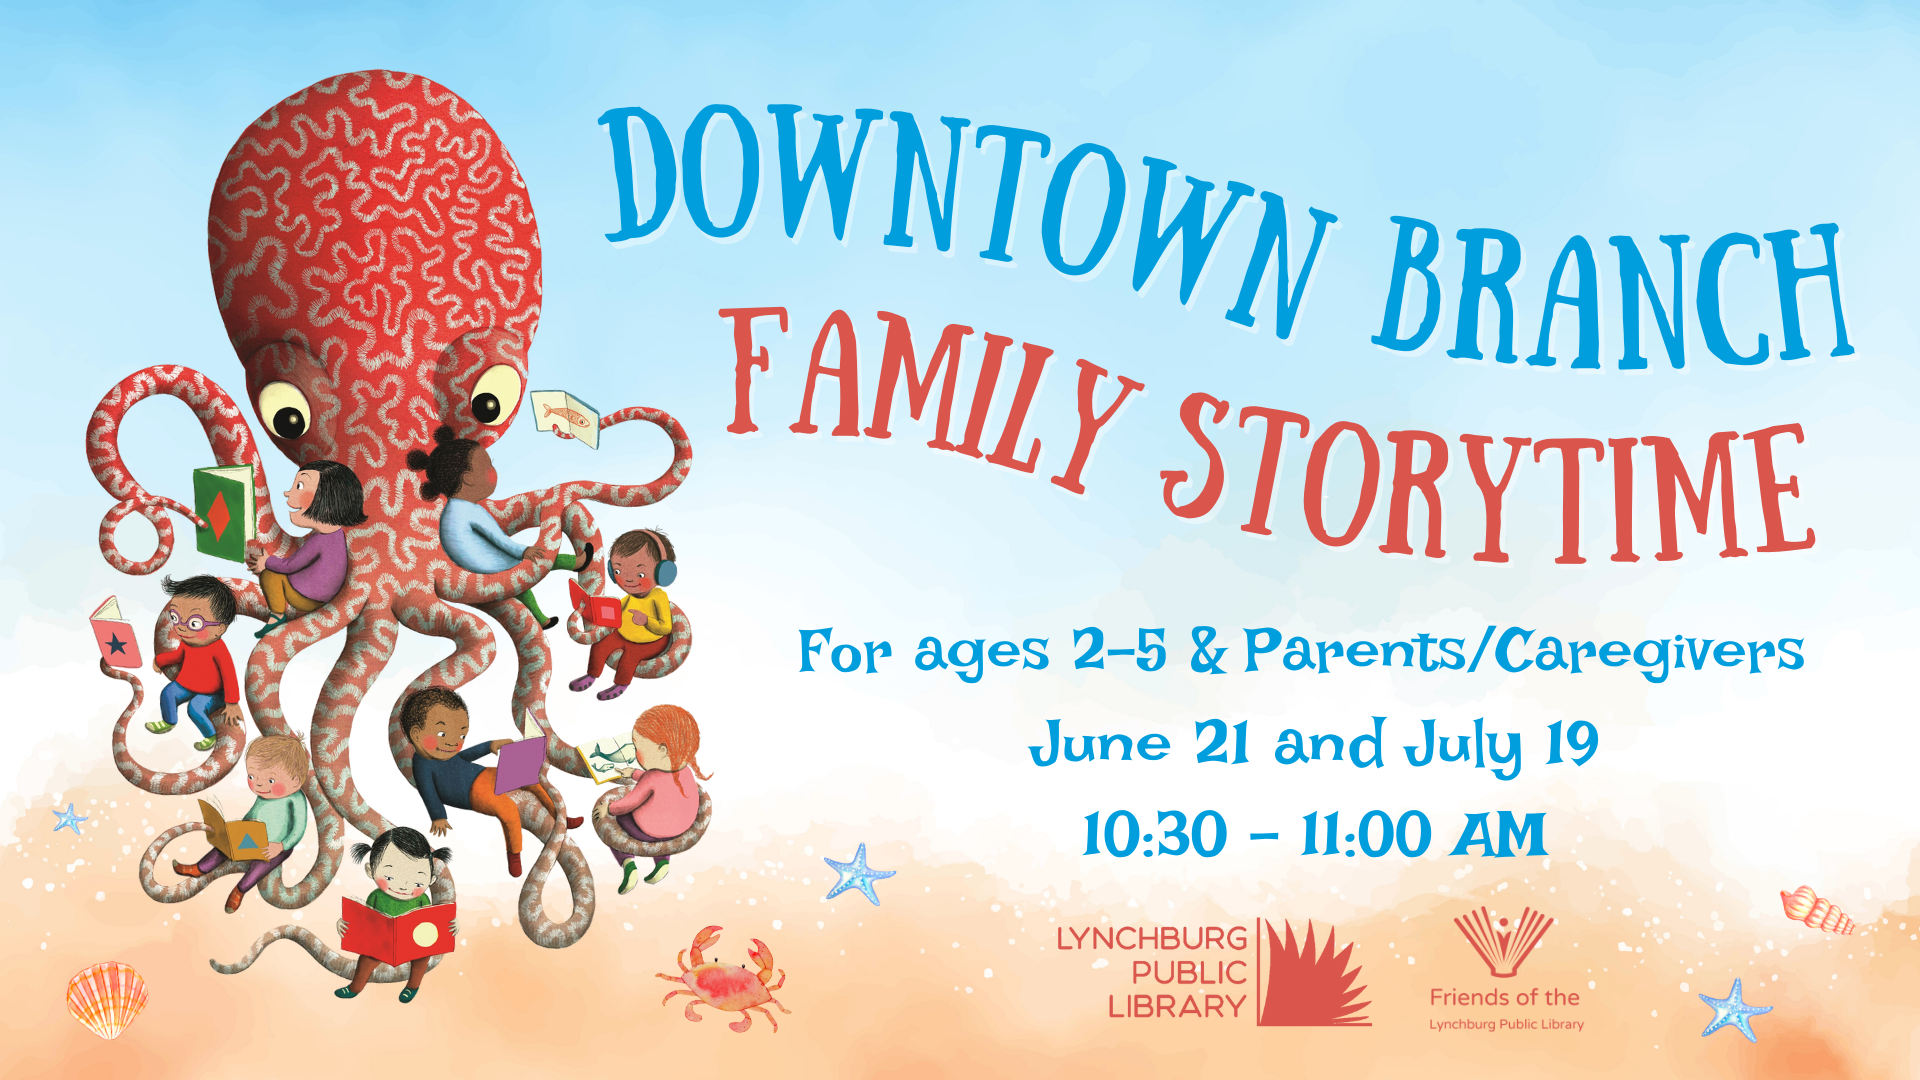 Downtown Branch Family Storytime on Tuesday, June 21 and Tuesday, July 19. 10:30-11:00 am. For children ages 2-5 and their parents or caregivers.